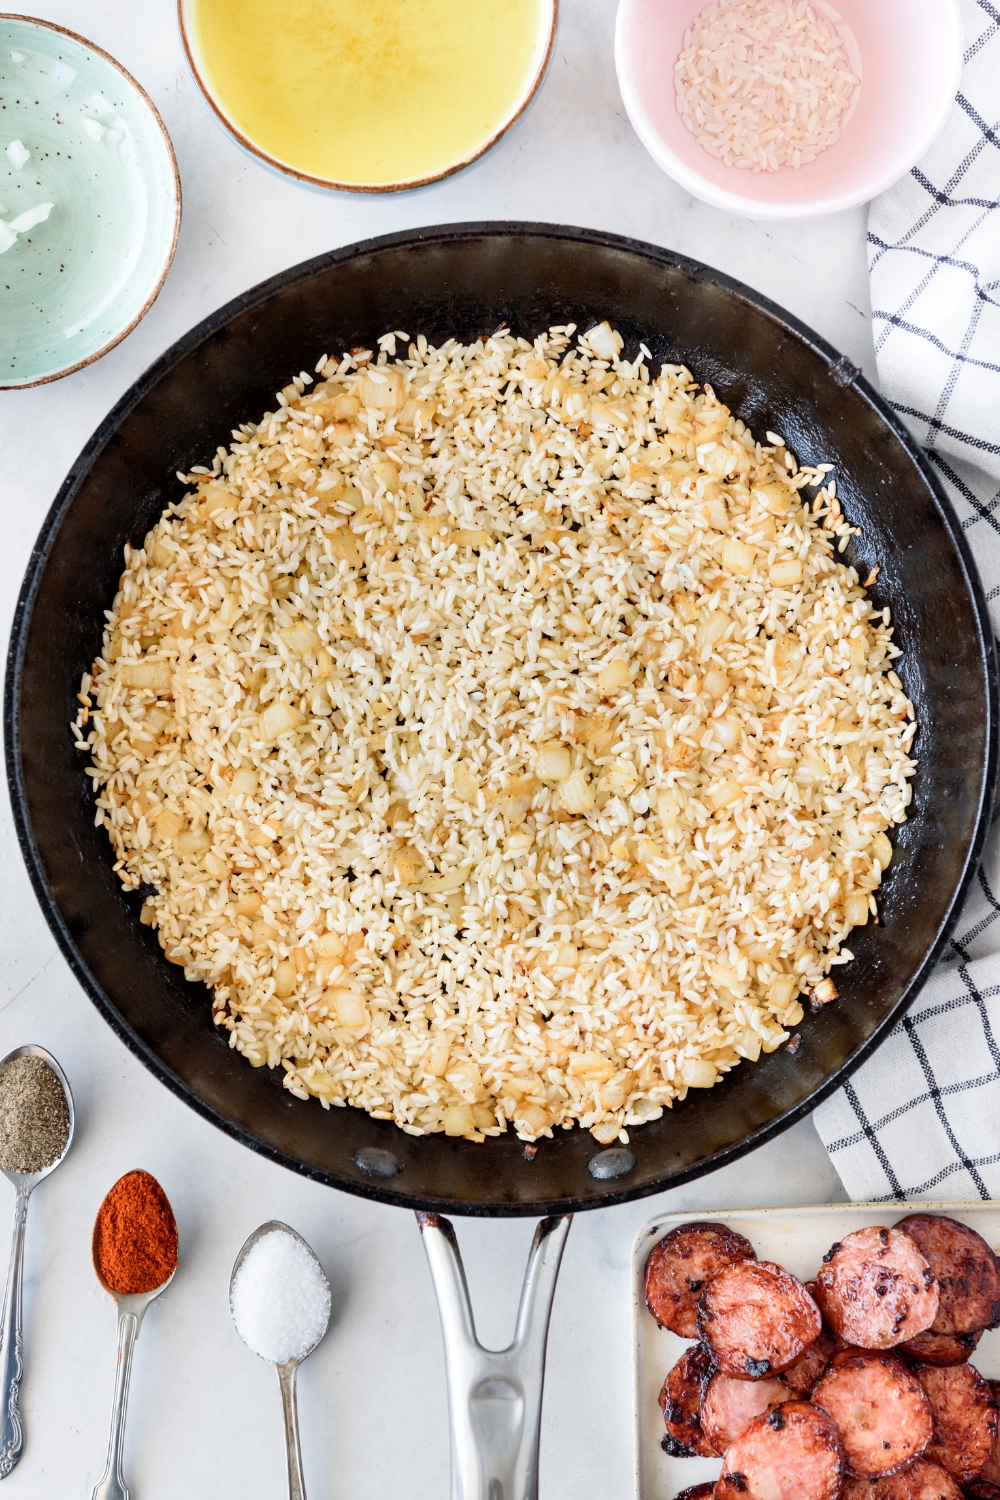 A skillet filled with diced onion and rice being browned.